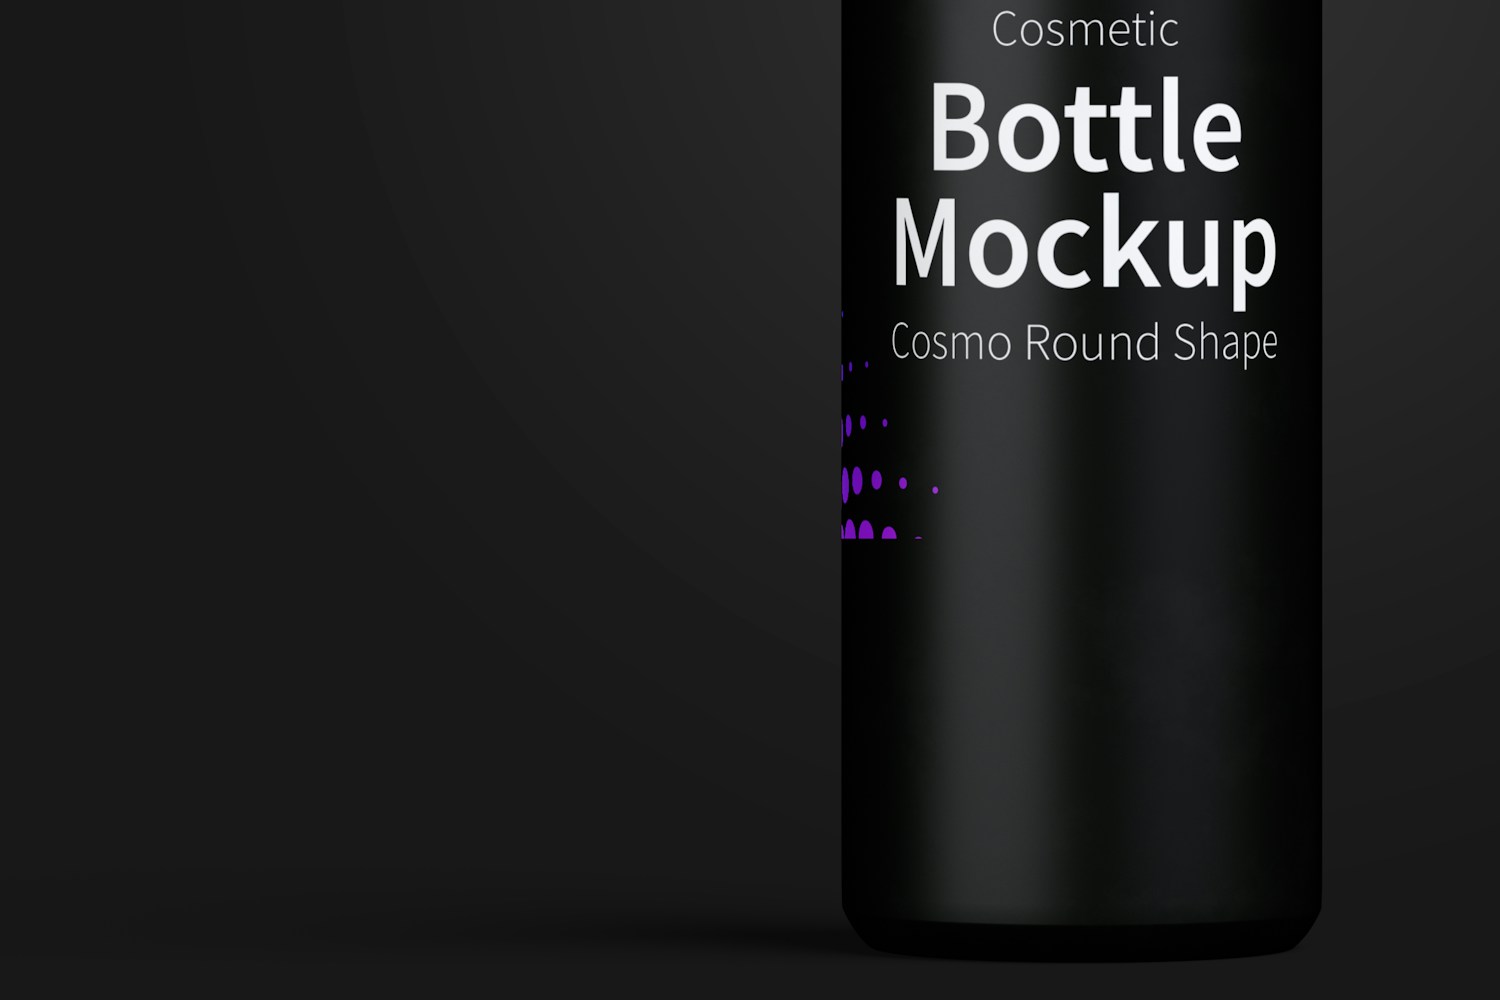 4 oz / 120 ml Cosmo Round Shape Cosmetic Bottle Mockup with Disc Cap in Front View 02